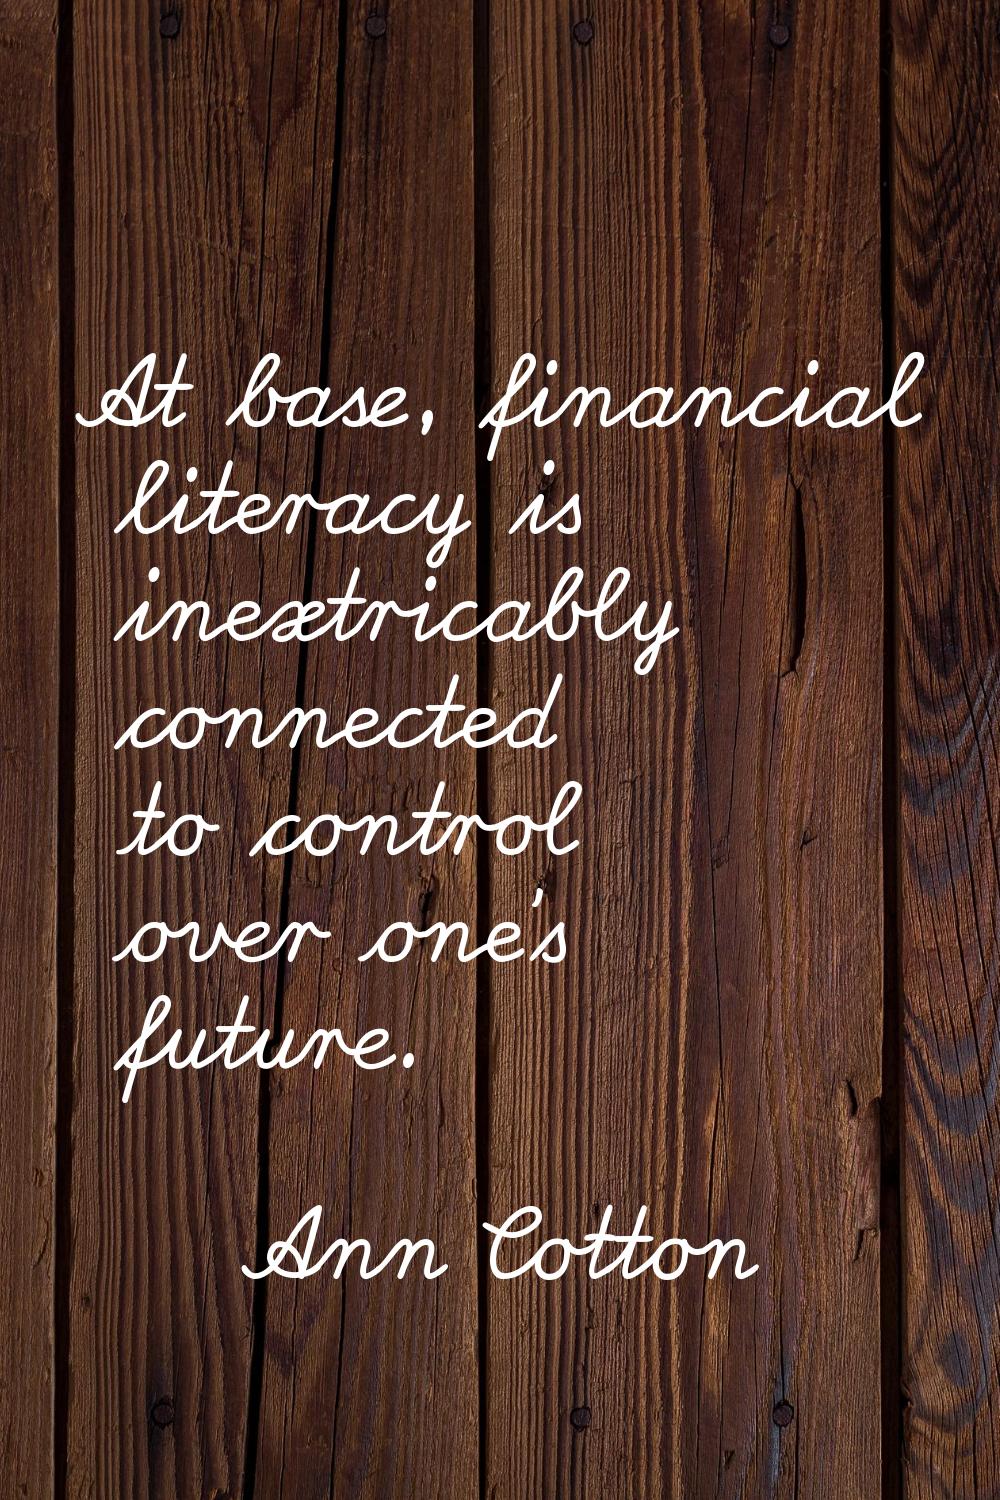 At base, financial literacy is inextricably connected to control over one's future.